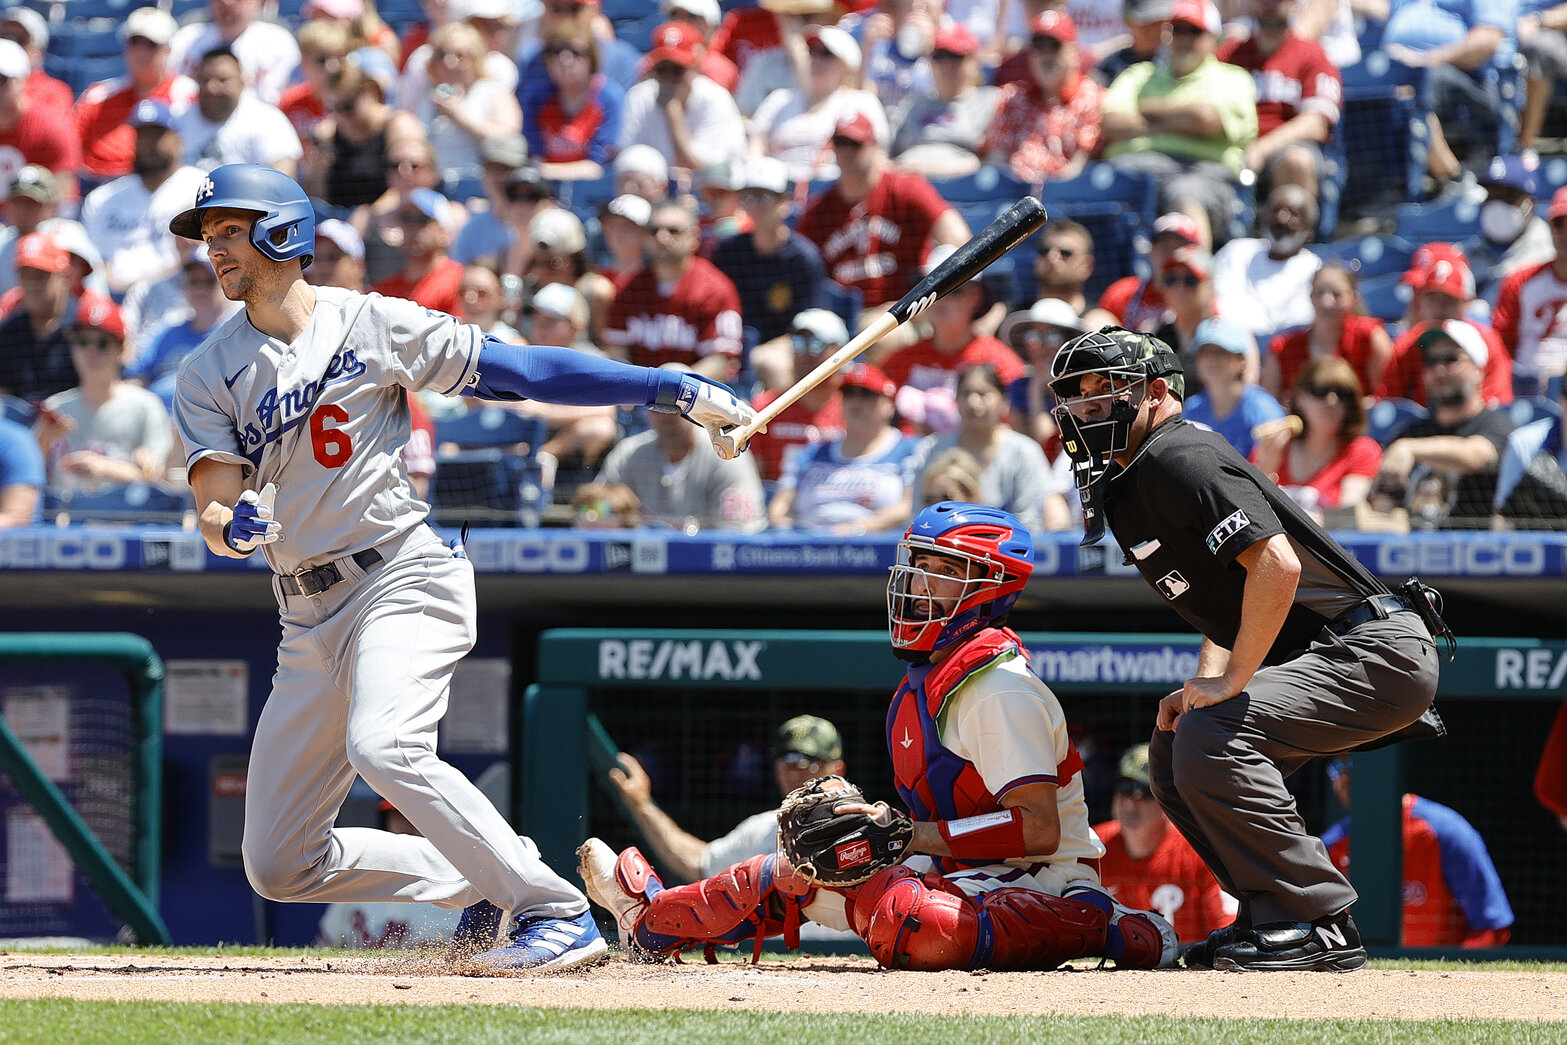 Trea Turner hits a double during the first inning against the Philadelphia Phillies at Citizens Bank Park on May 22, 2022 in Philadelphia, Pennsylvania. Photo Credit: Tim Nwachukwu/Getty Images.